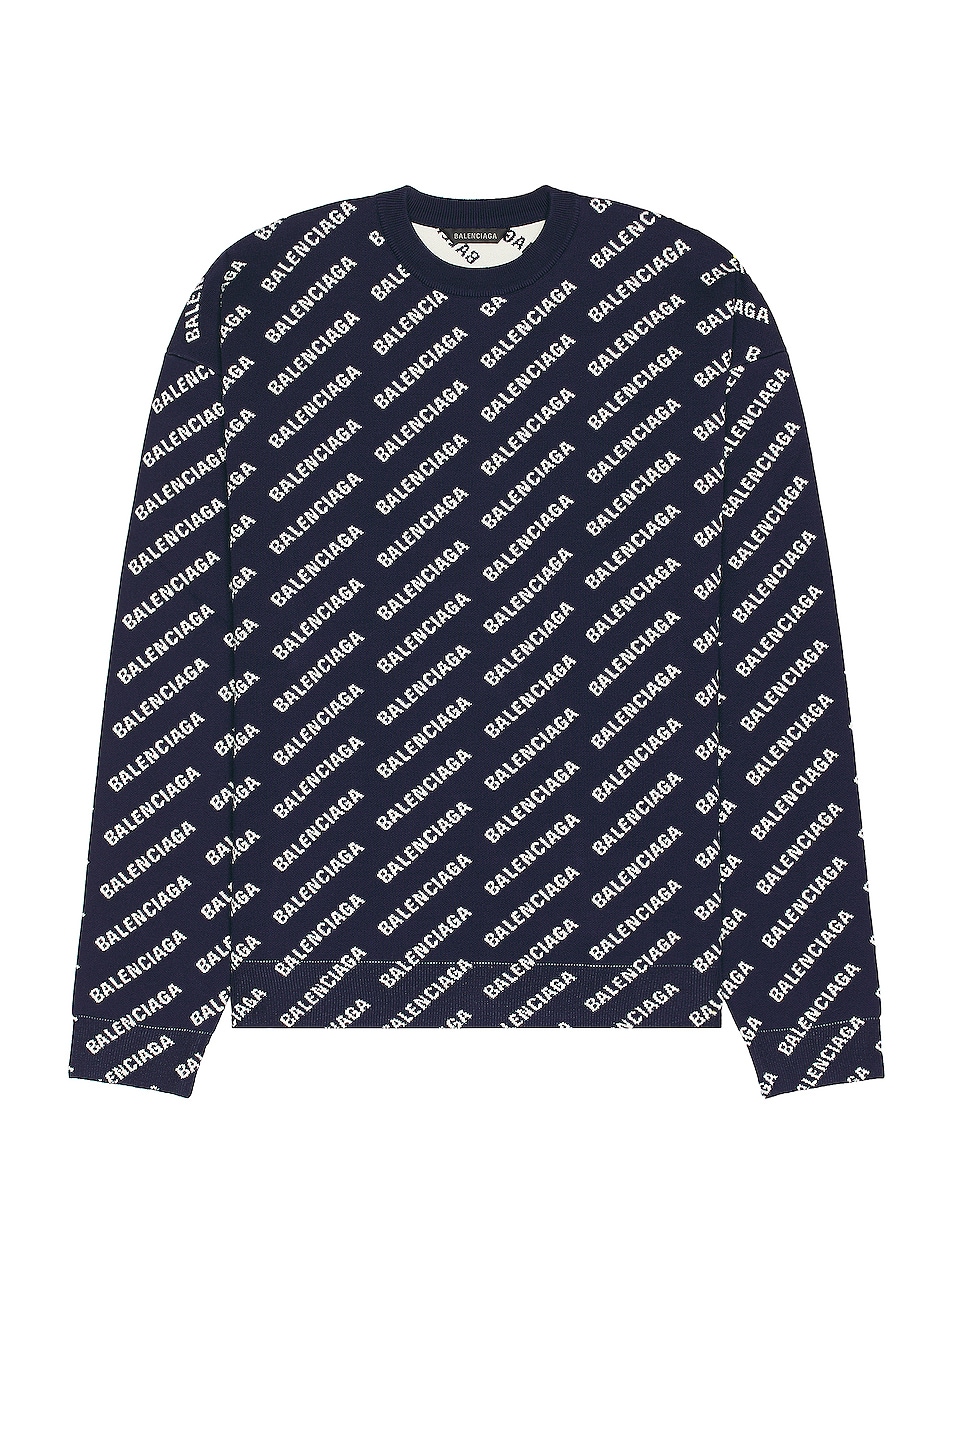 Image 1 of Balenciaga All Over Sweater in Navy & White